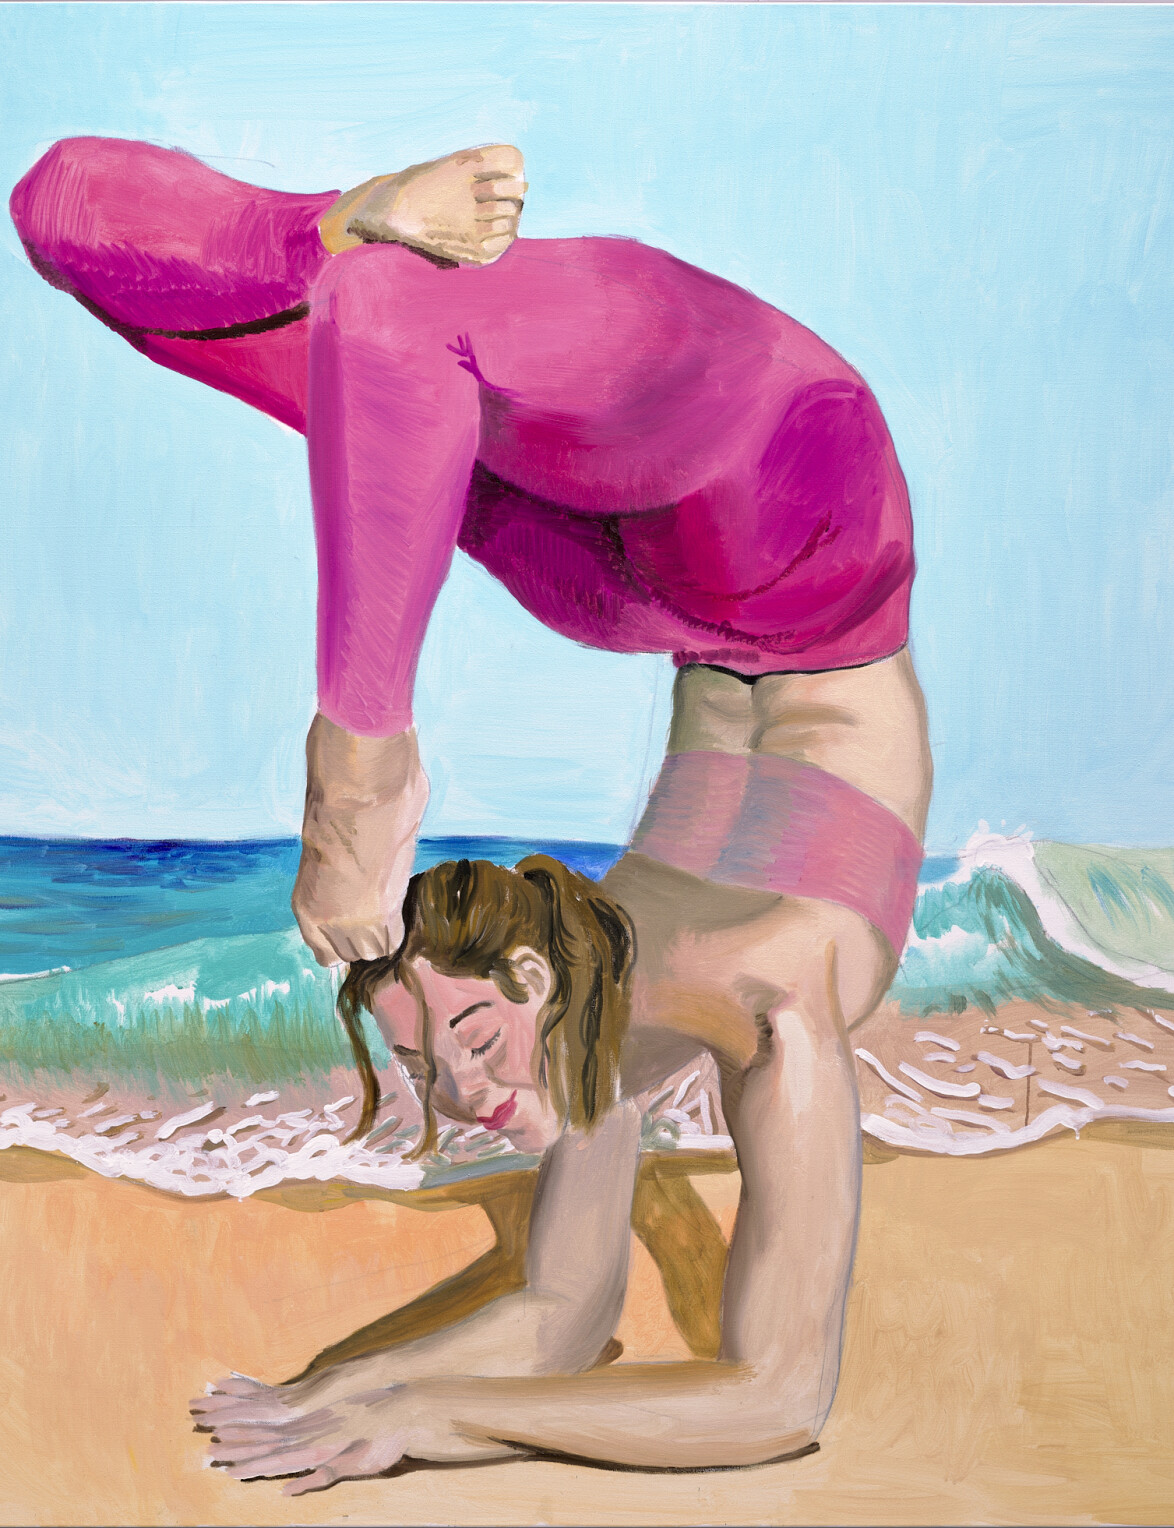 YANG Lee
Lulu Lime - Supported Handstand
2022
Oil on canvas
200×200cm
2022
Oil on canvas